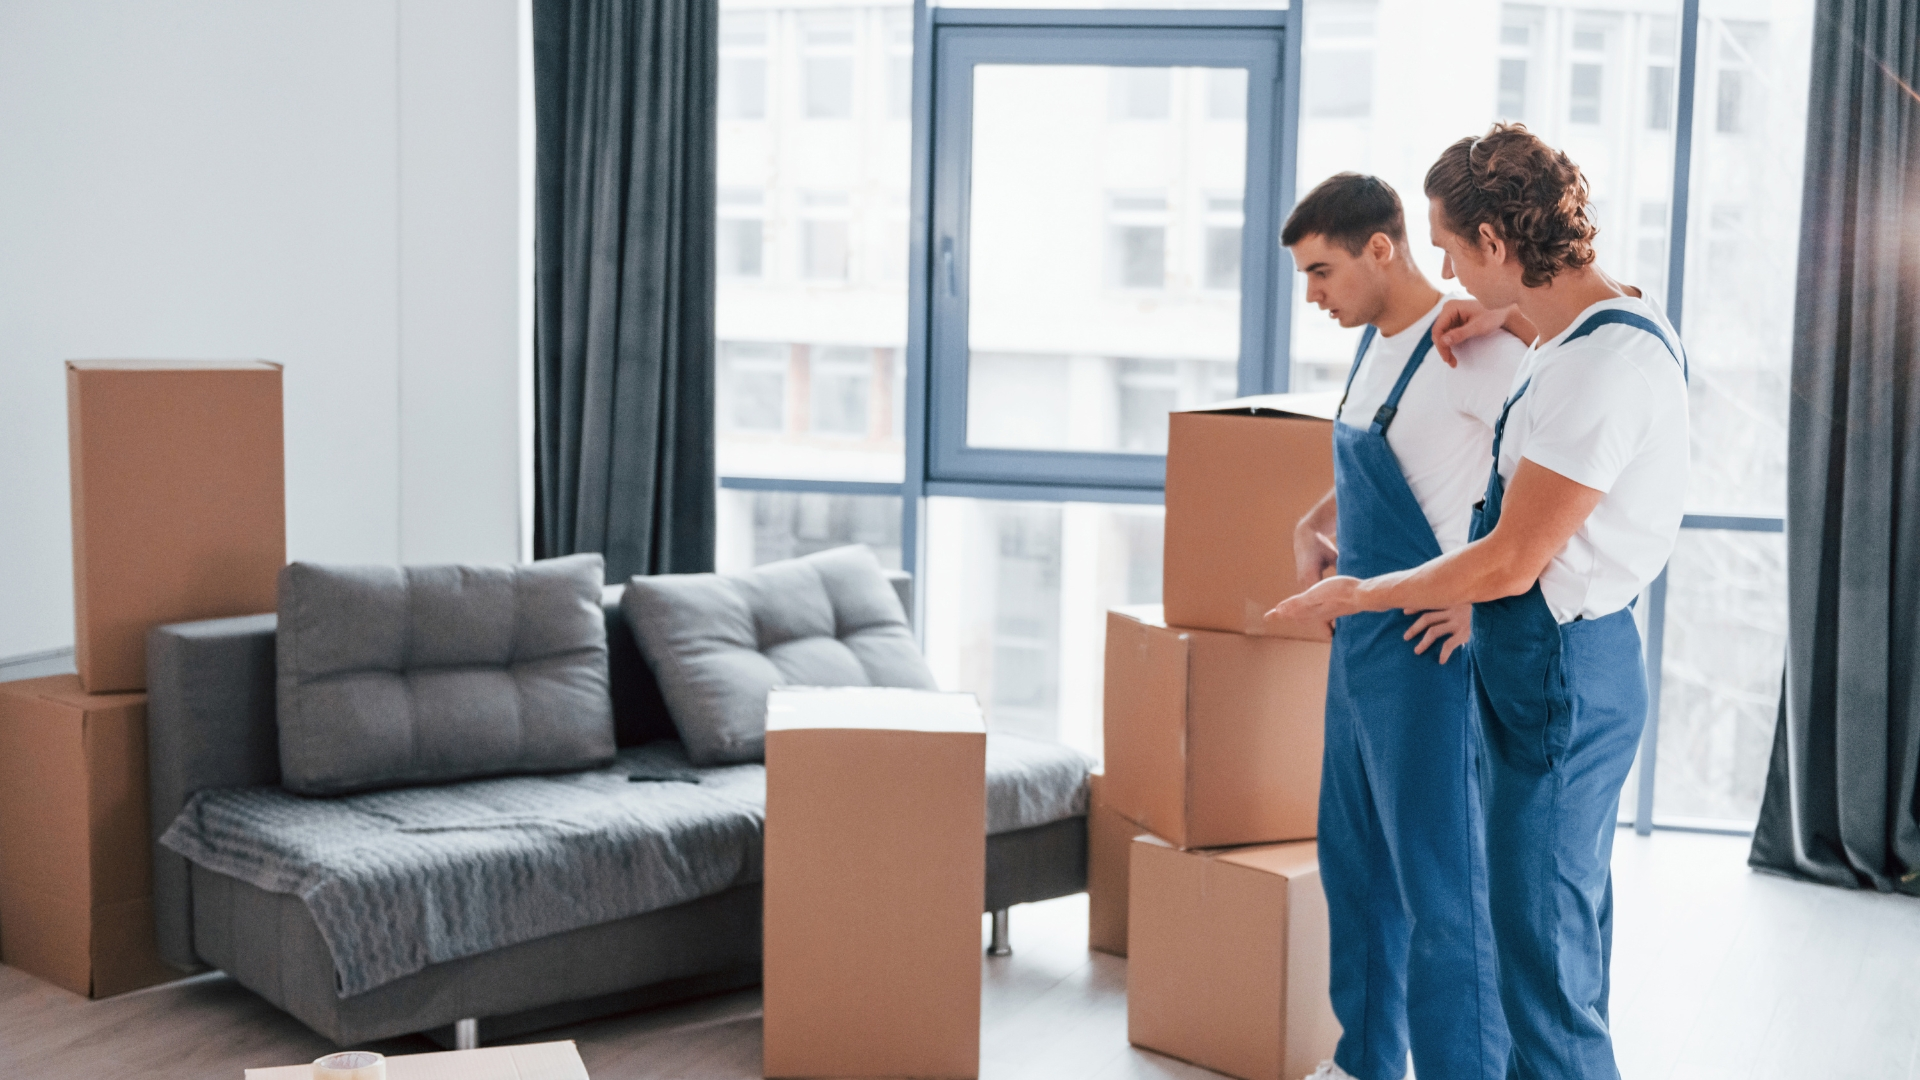 Why is time management crucial when moving to a new home